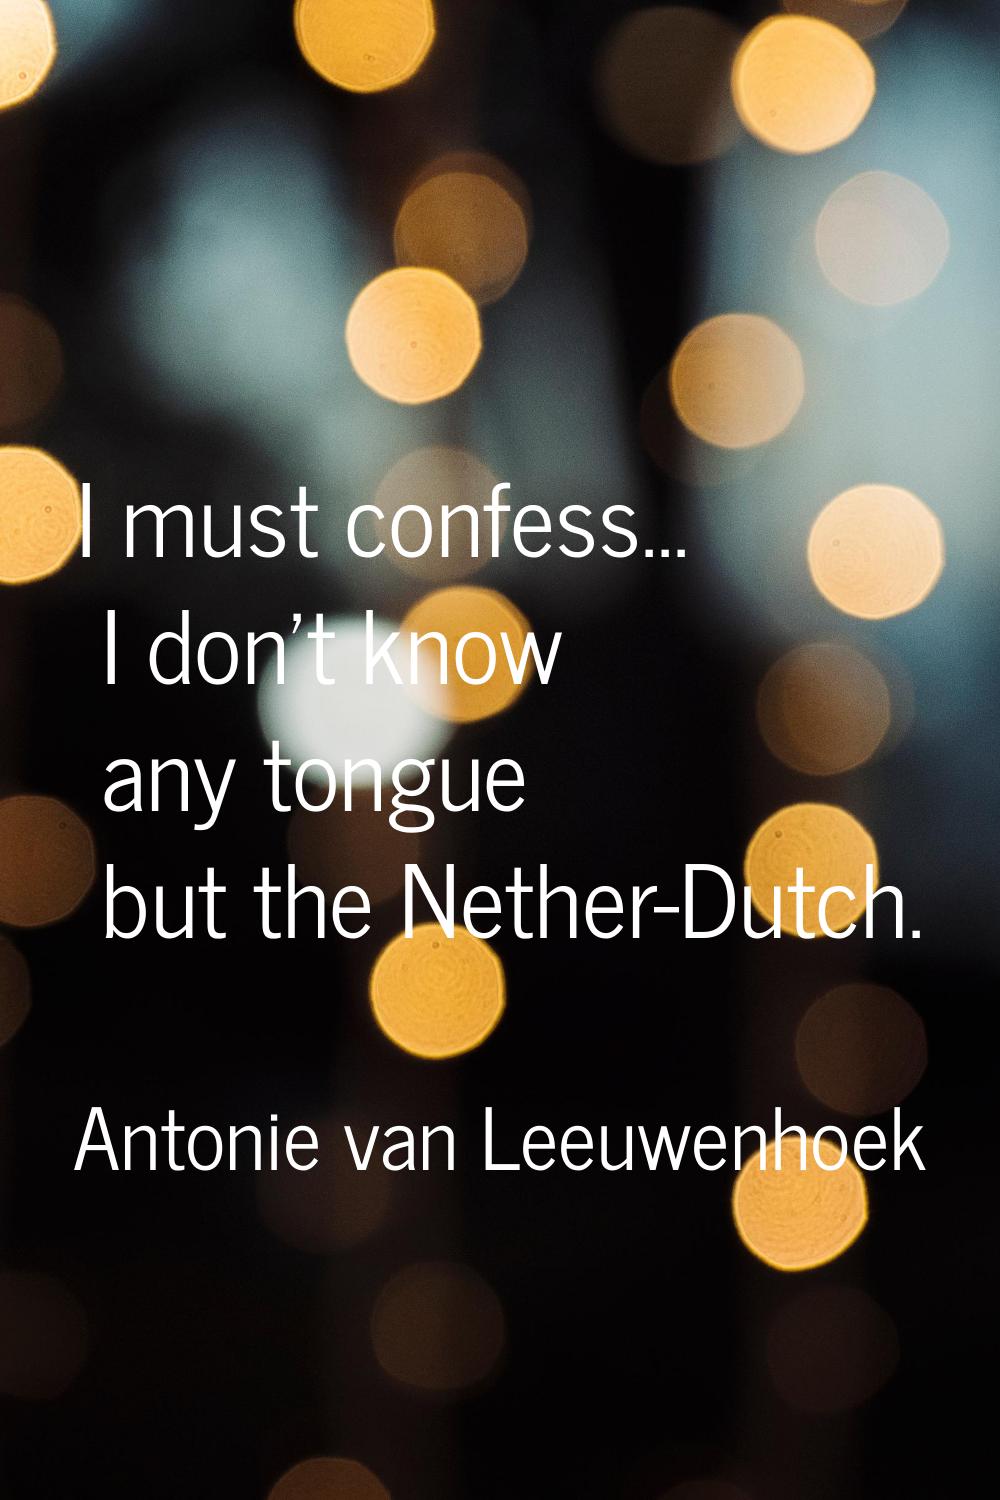 I must confess... I don't know any tongue but the Nether-Dutch.